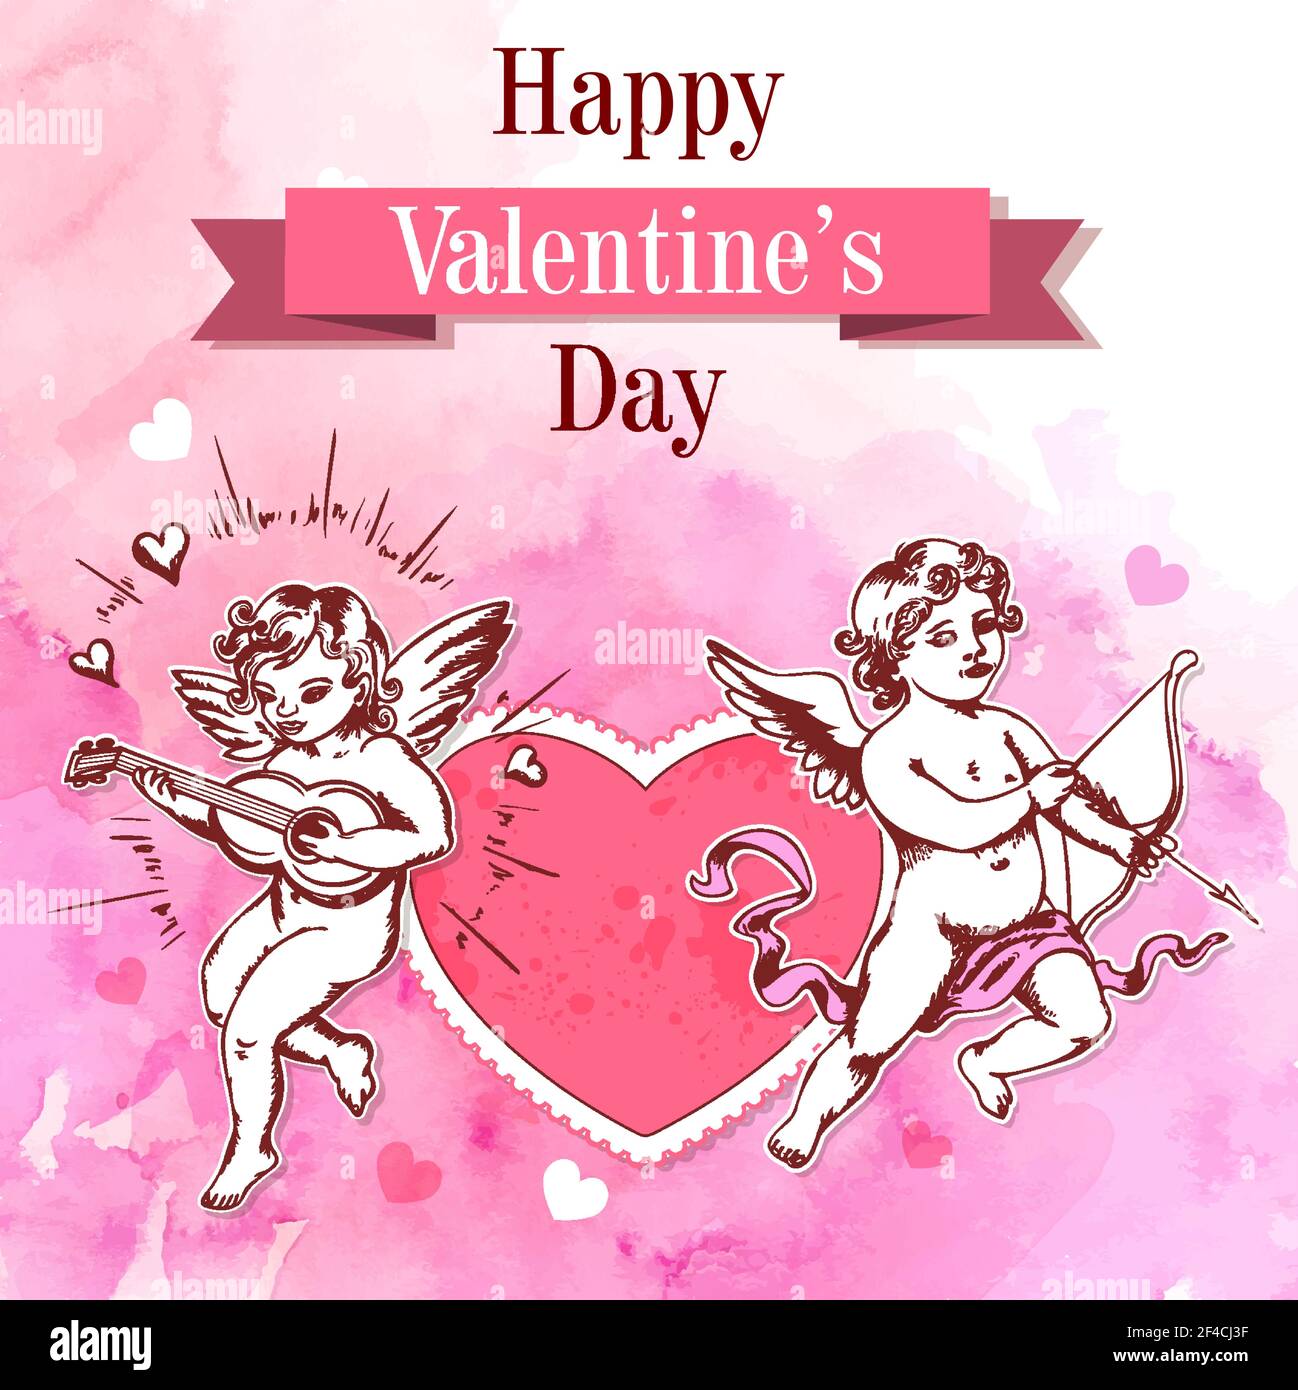 Vintage romantic Valentine card with two cupids and heart on a pink watercolor background. Vector illustration. Stock Vector